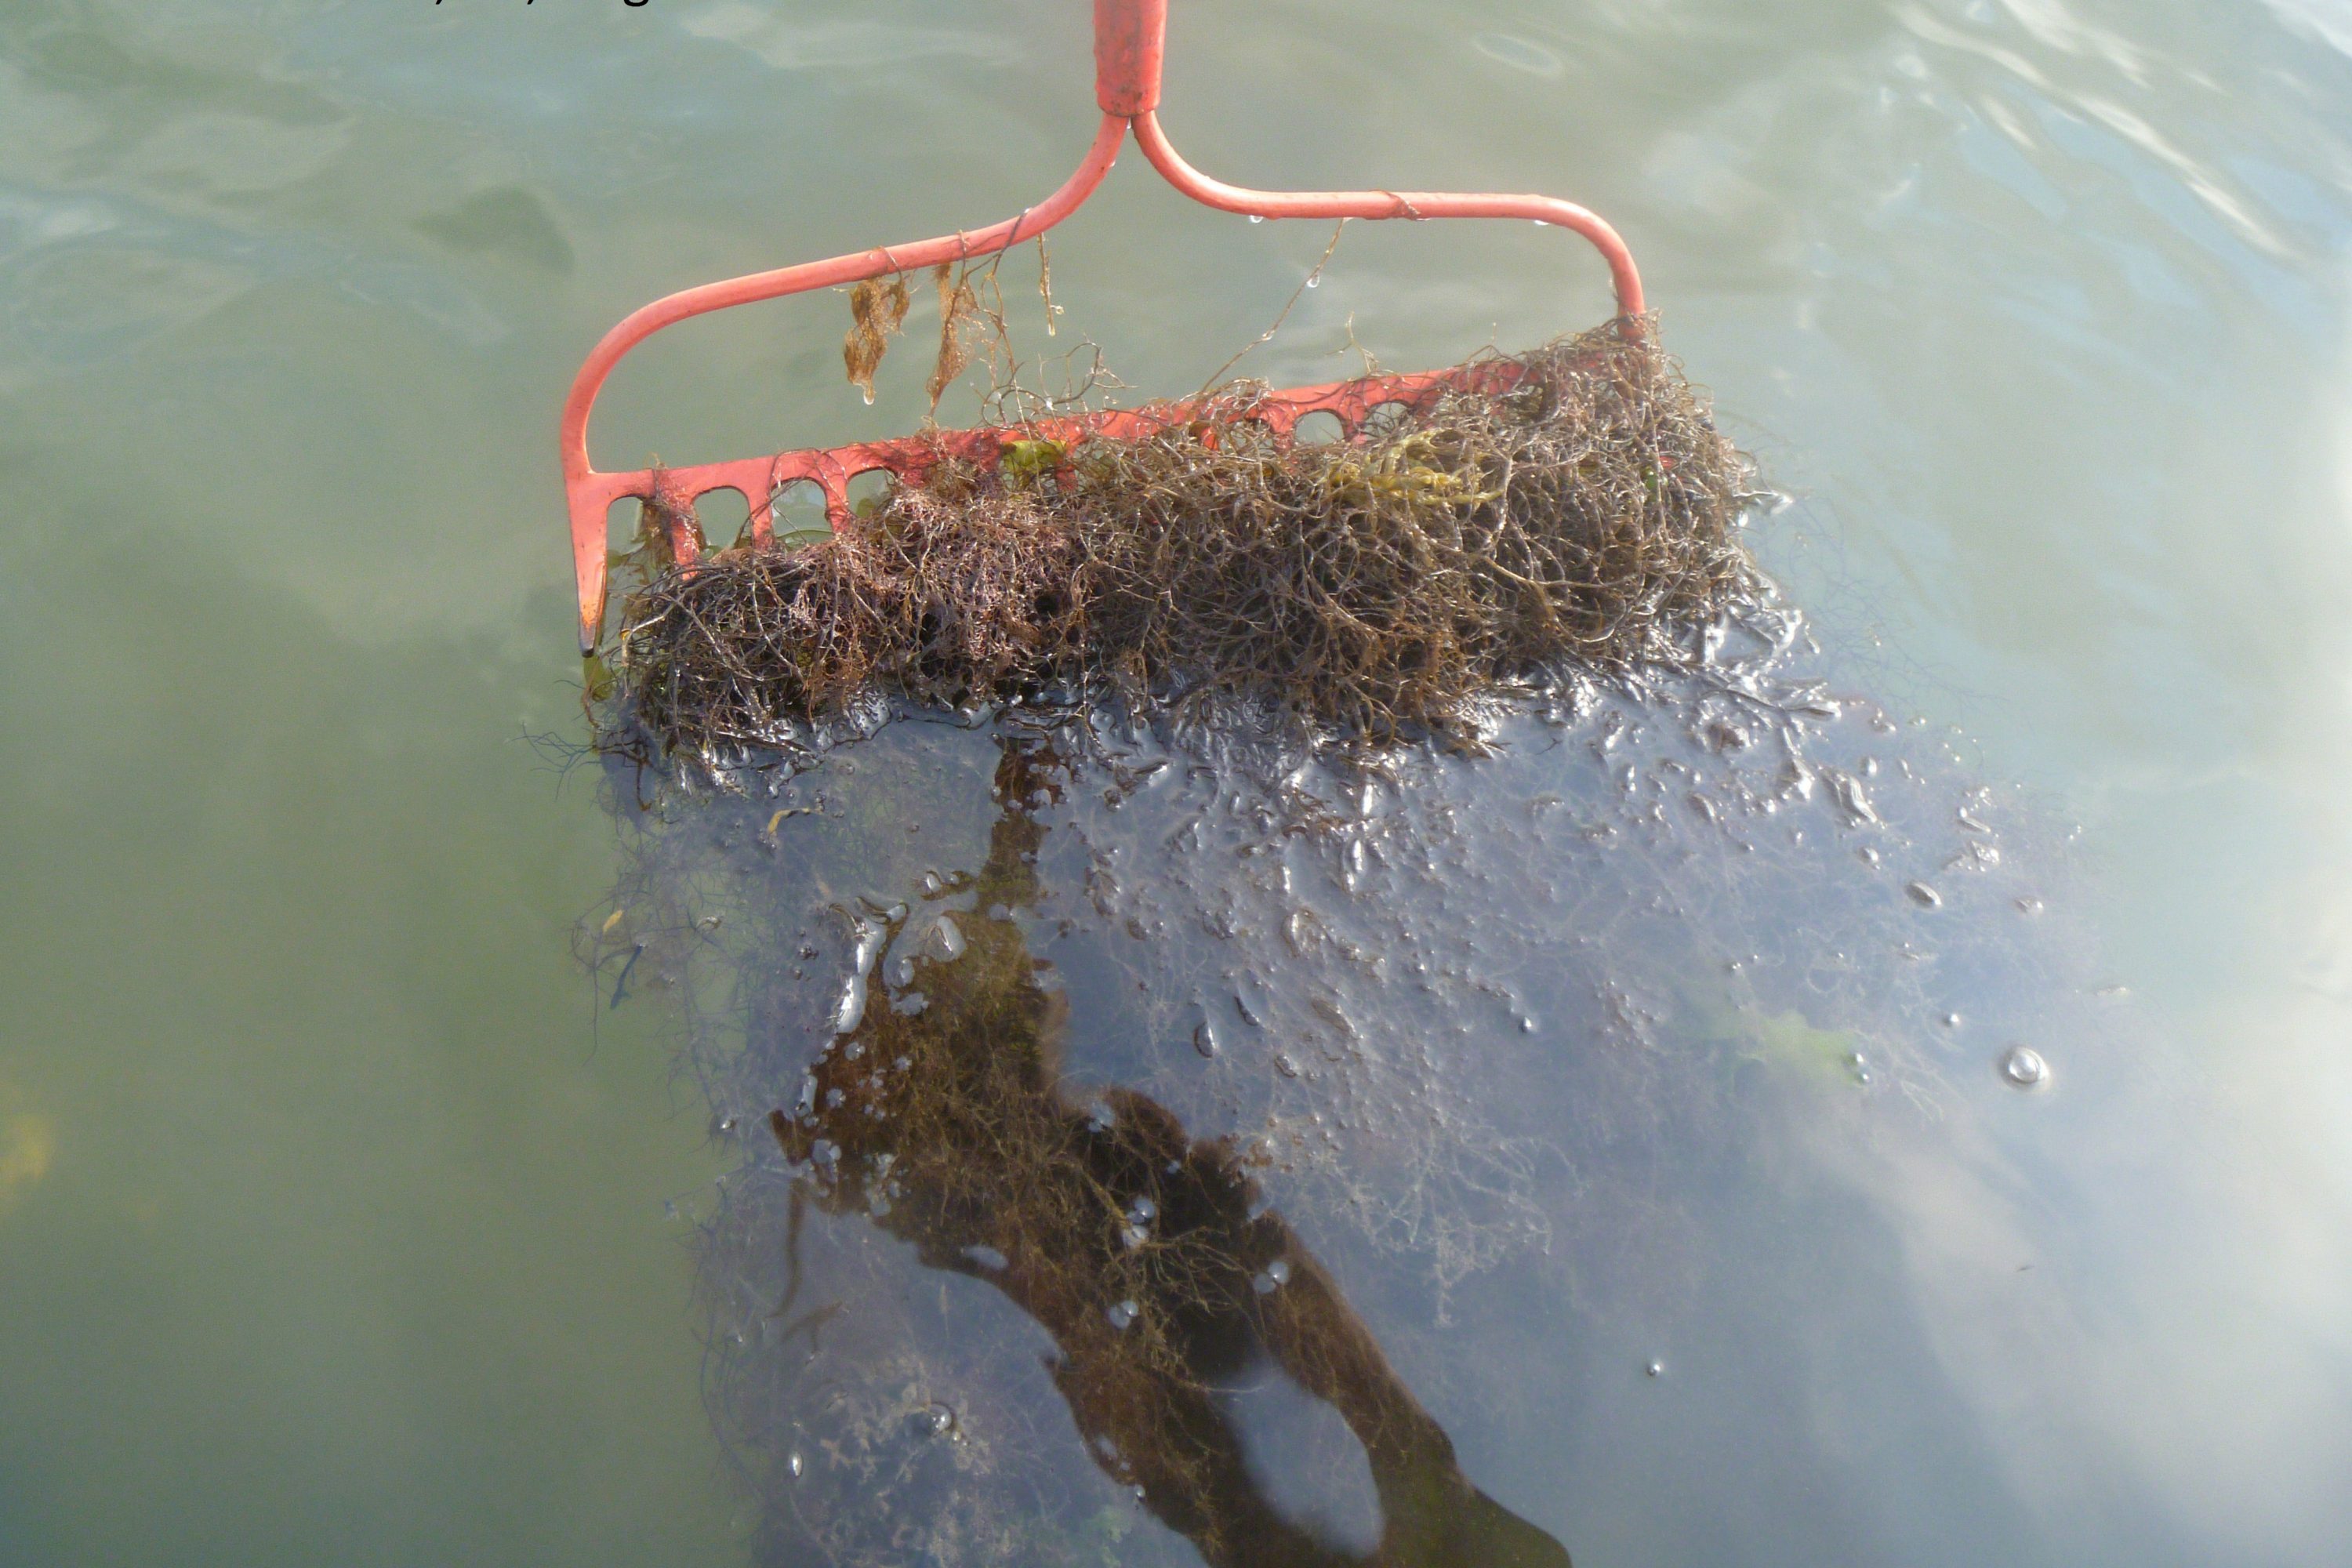 Seaweed collected by reaching down to the bottom and pulling up the rake. The branching red seaweed and the amount collected in just one pass indicate that a large amount of nutrients are fertilizing the growth of seaweed in this bay. (Jamie Vaudrey/UConn Photo)